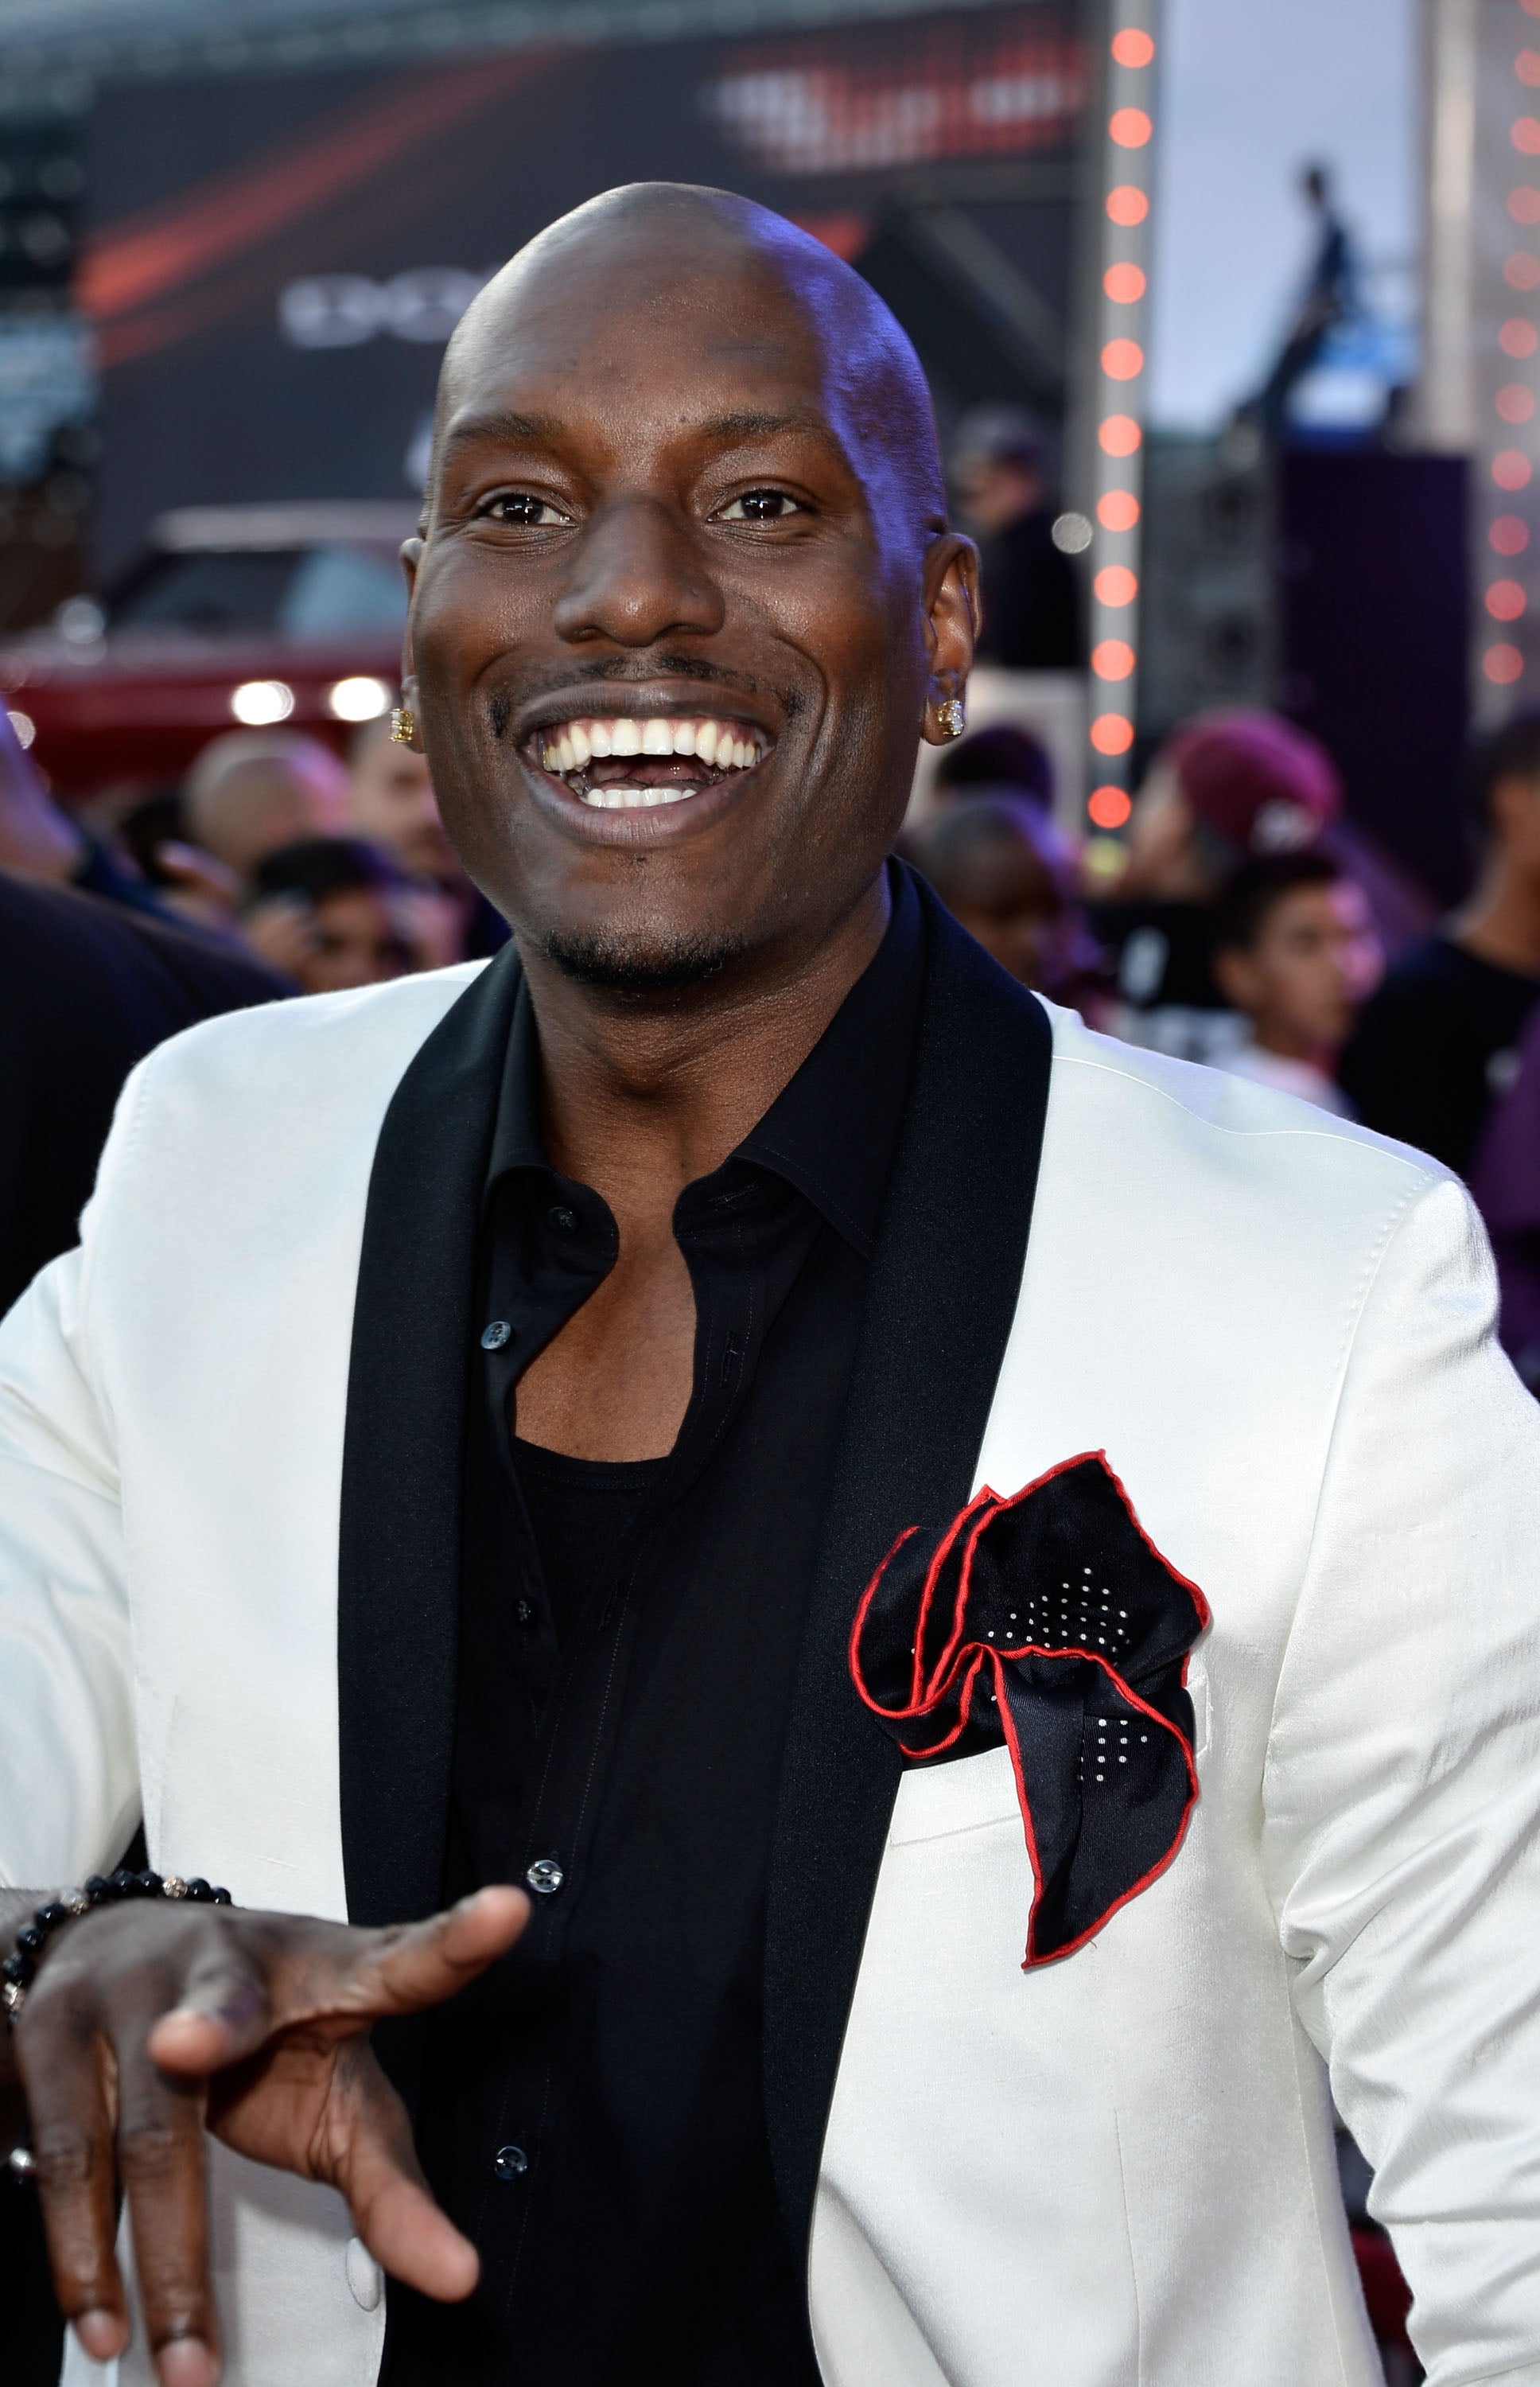 Tyrese Gibson Slams 'Fast and Furious' Spinoff: 'The Real Selfish #CandyA** Revealed ...